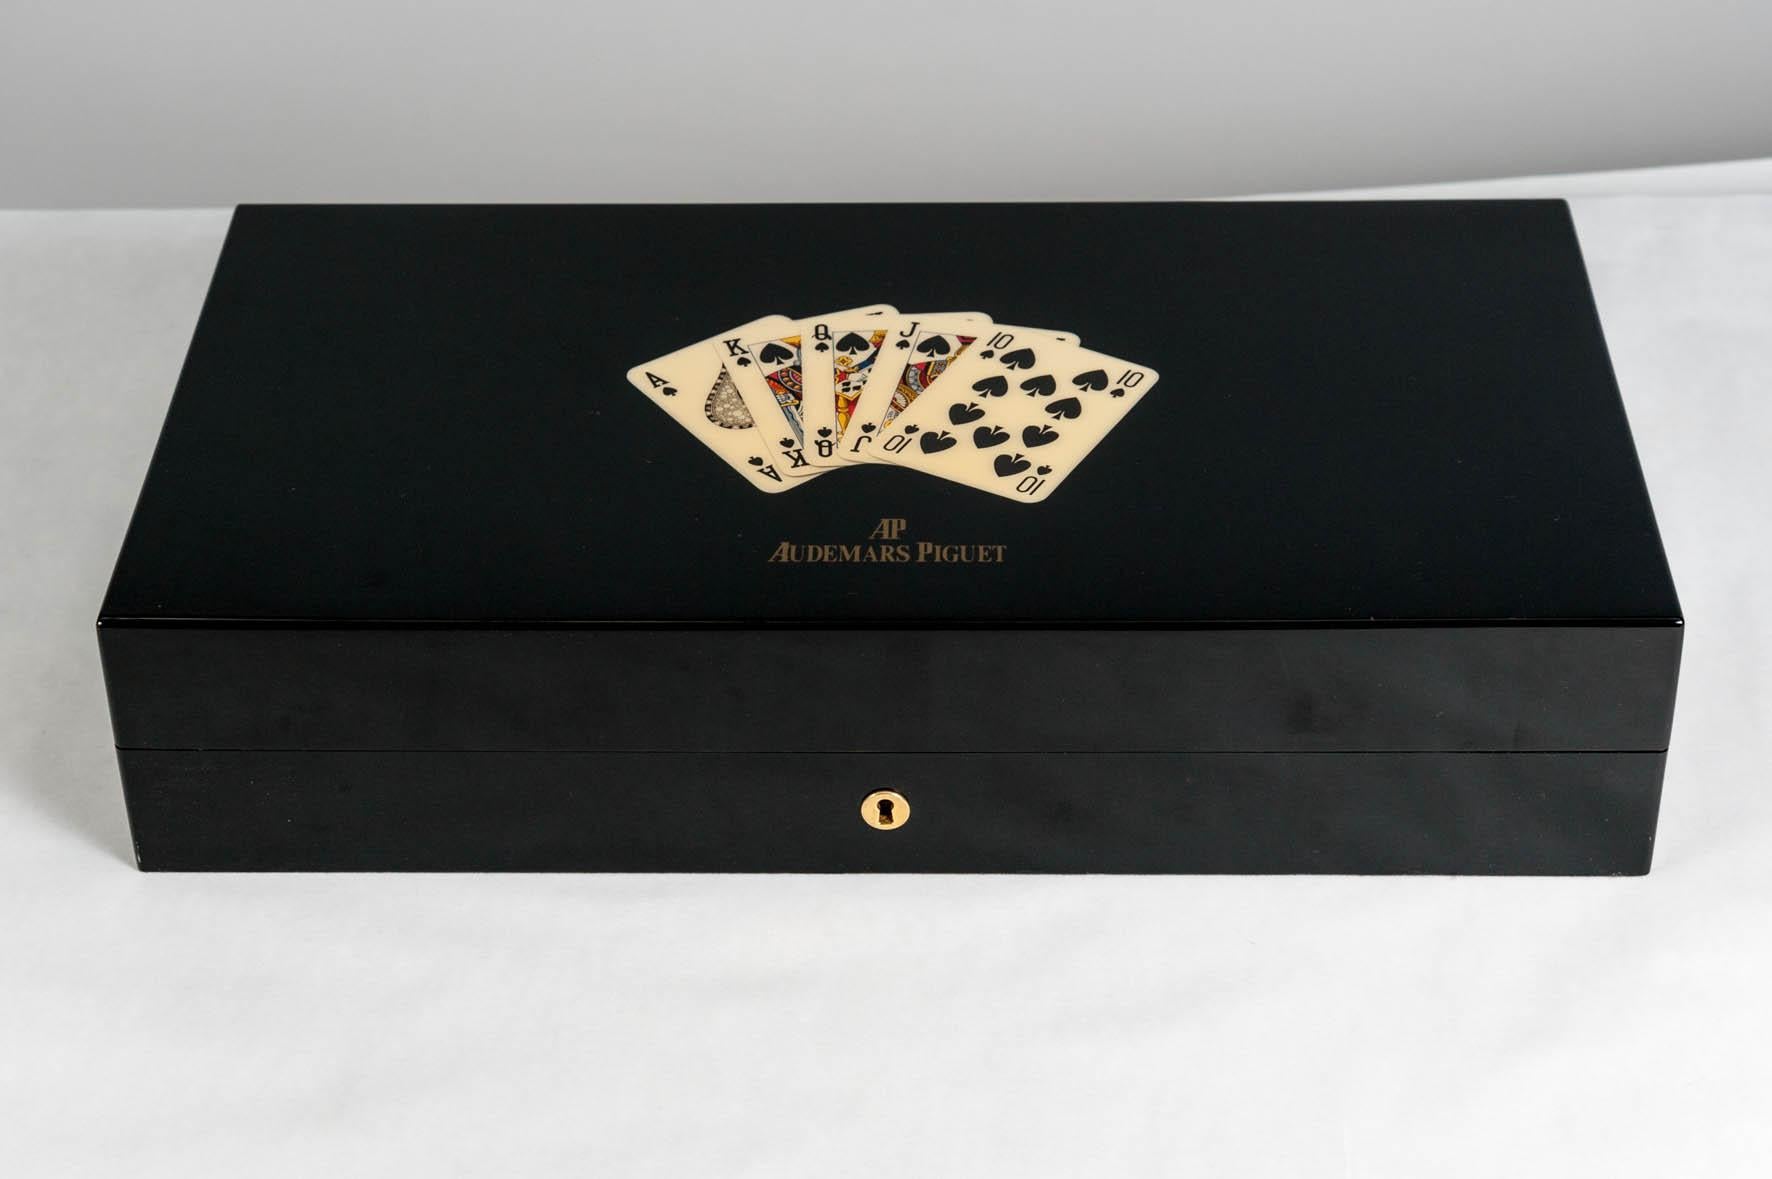 Ultra rare game box who is usually sold with two watches in the honour of Las Vegas strip
This box was sold with original Audemars Piguet tokens and cards who have been lost .
The original price with the two watches was $91000 and come from an